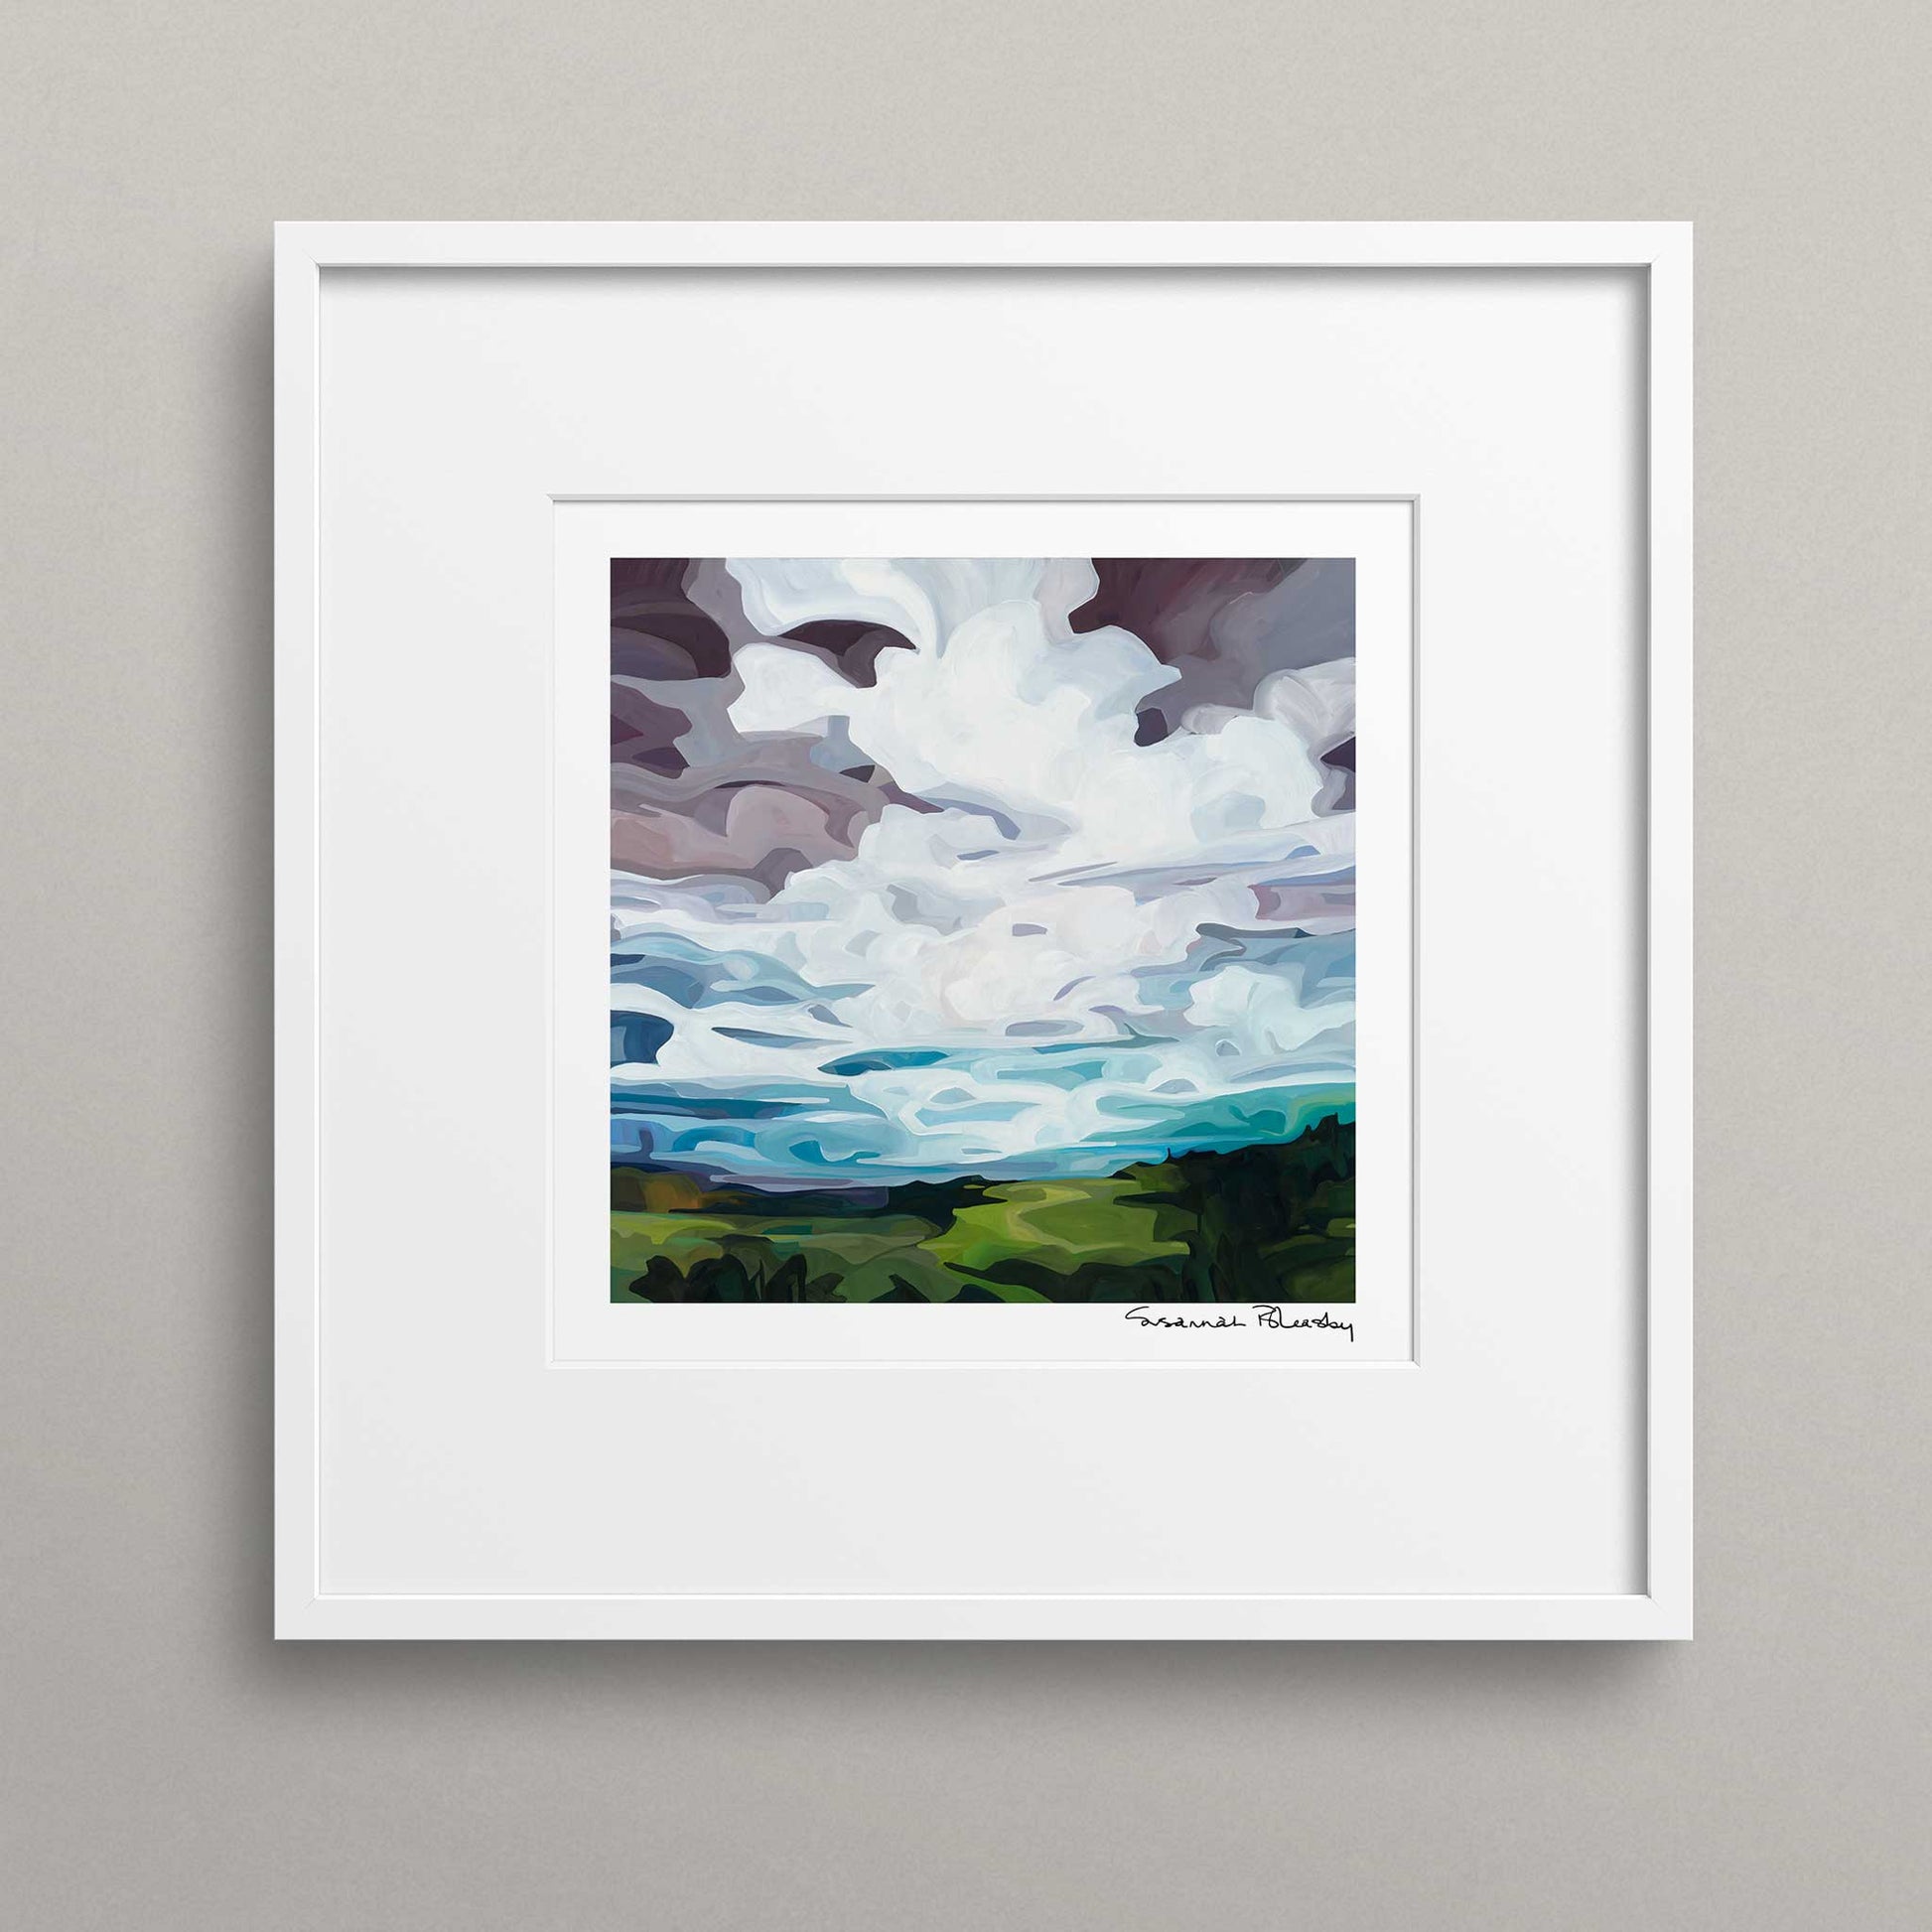 framed square art print based on an acrylic abstract painting of a landscape with a bright turquoise cloud-filled evening sky